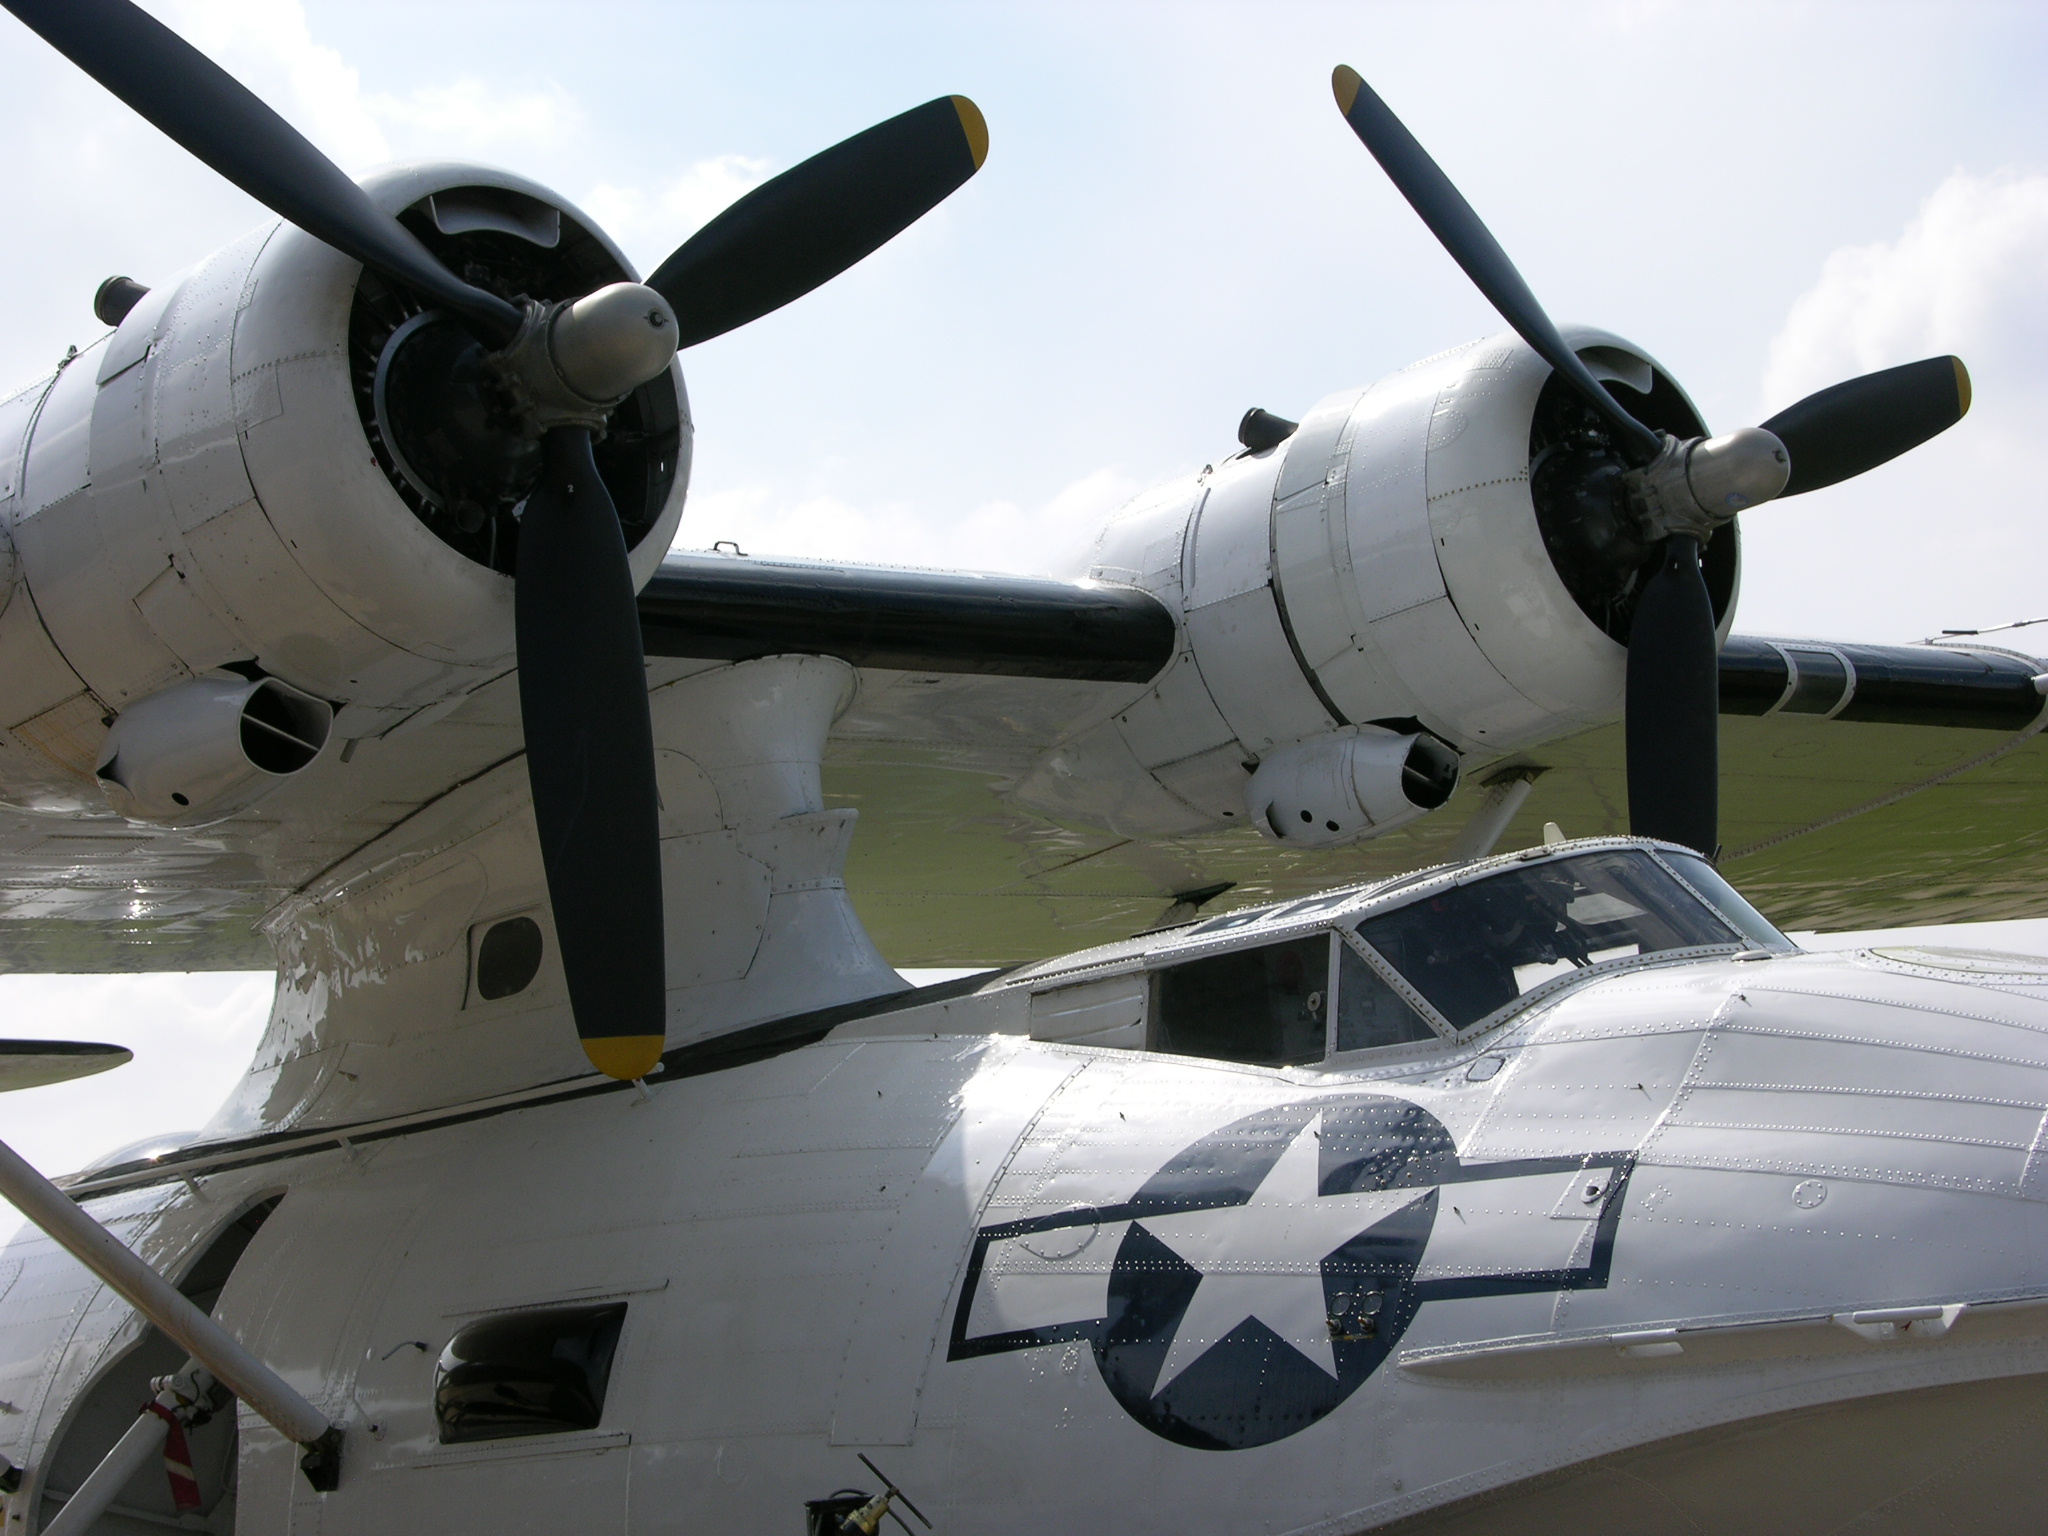 http://www.maquetland.com/upload/phototeque/images/3072/consolidated_pby_5a_catalina_ailes_moteurs.jpg